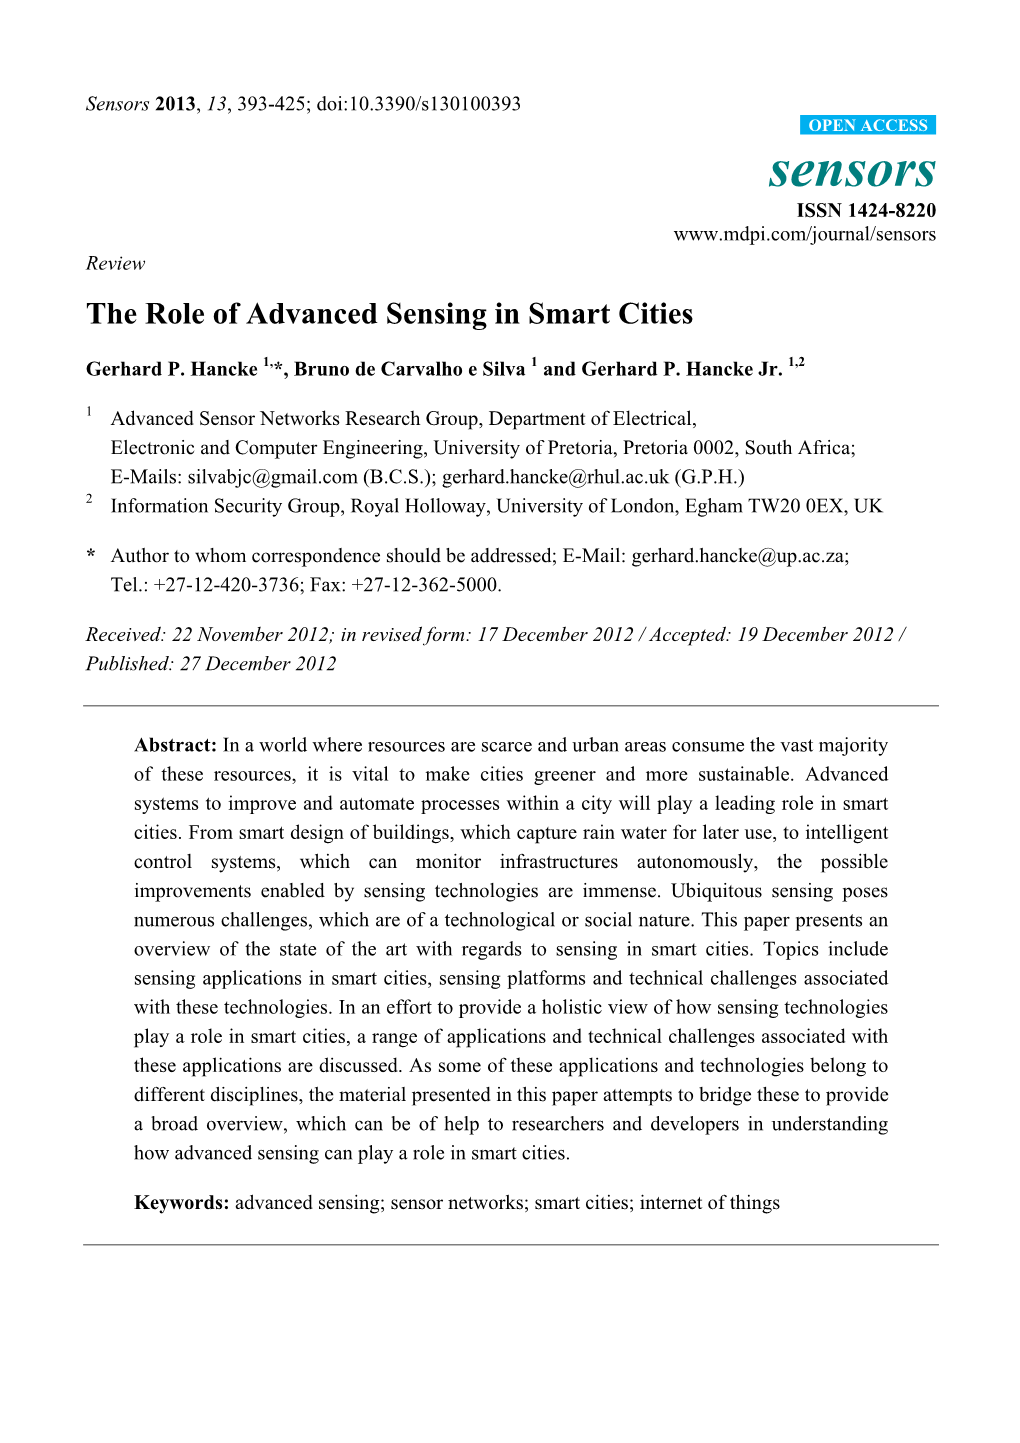 The Role of Advanced Sensing in Smart Cities